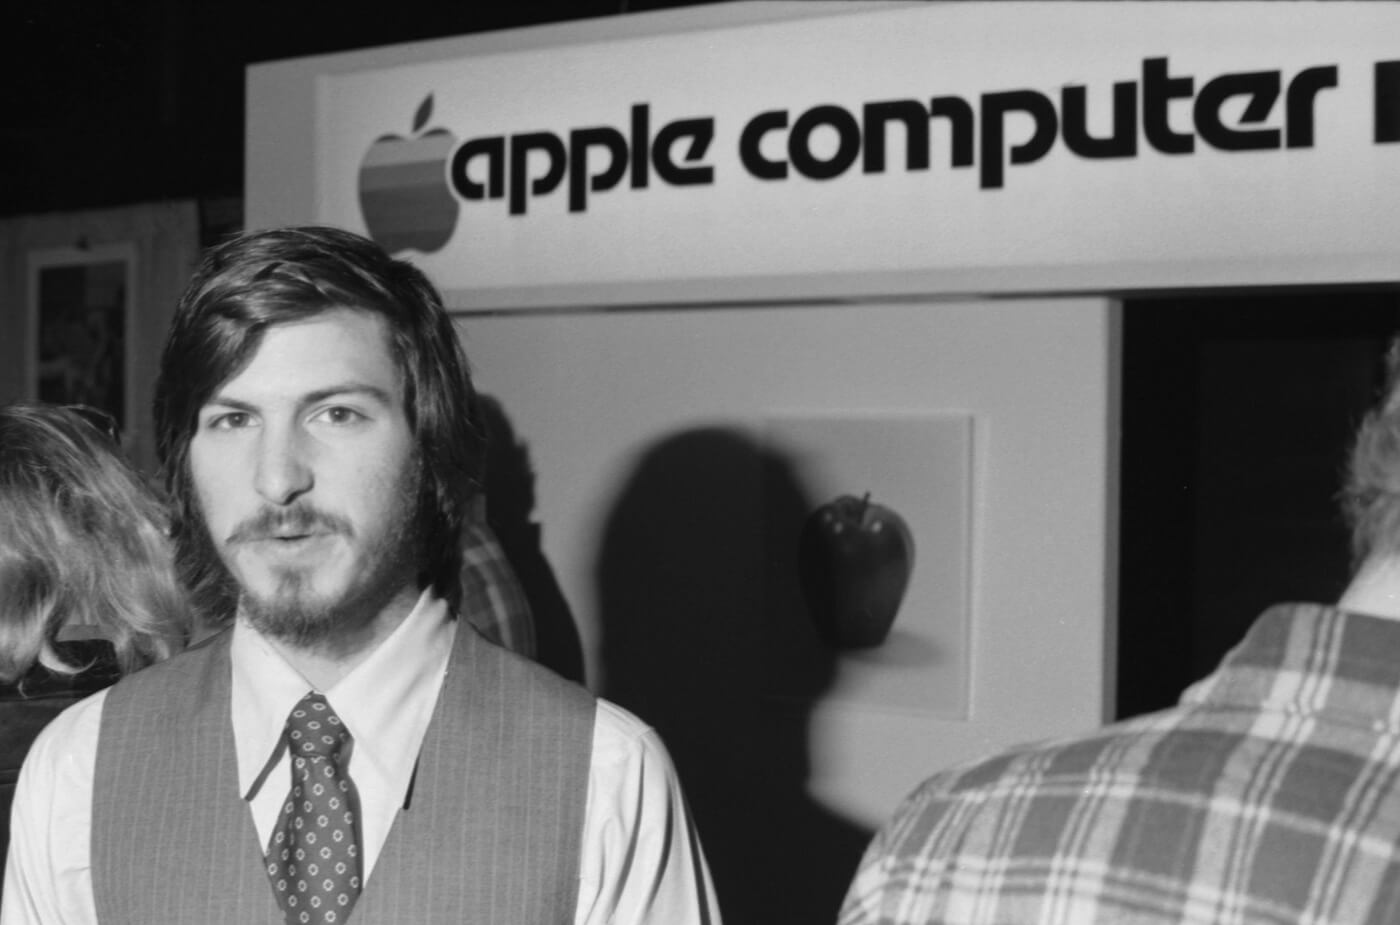 Steve Jobs' 1973 job application form is being auctioned for a fourth time, now with an accompanying NFT